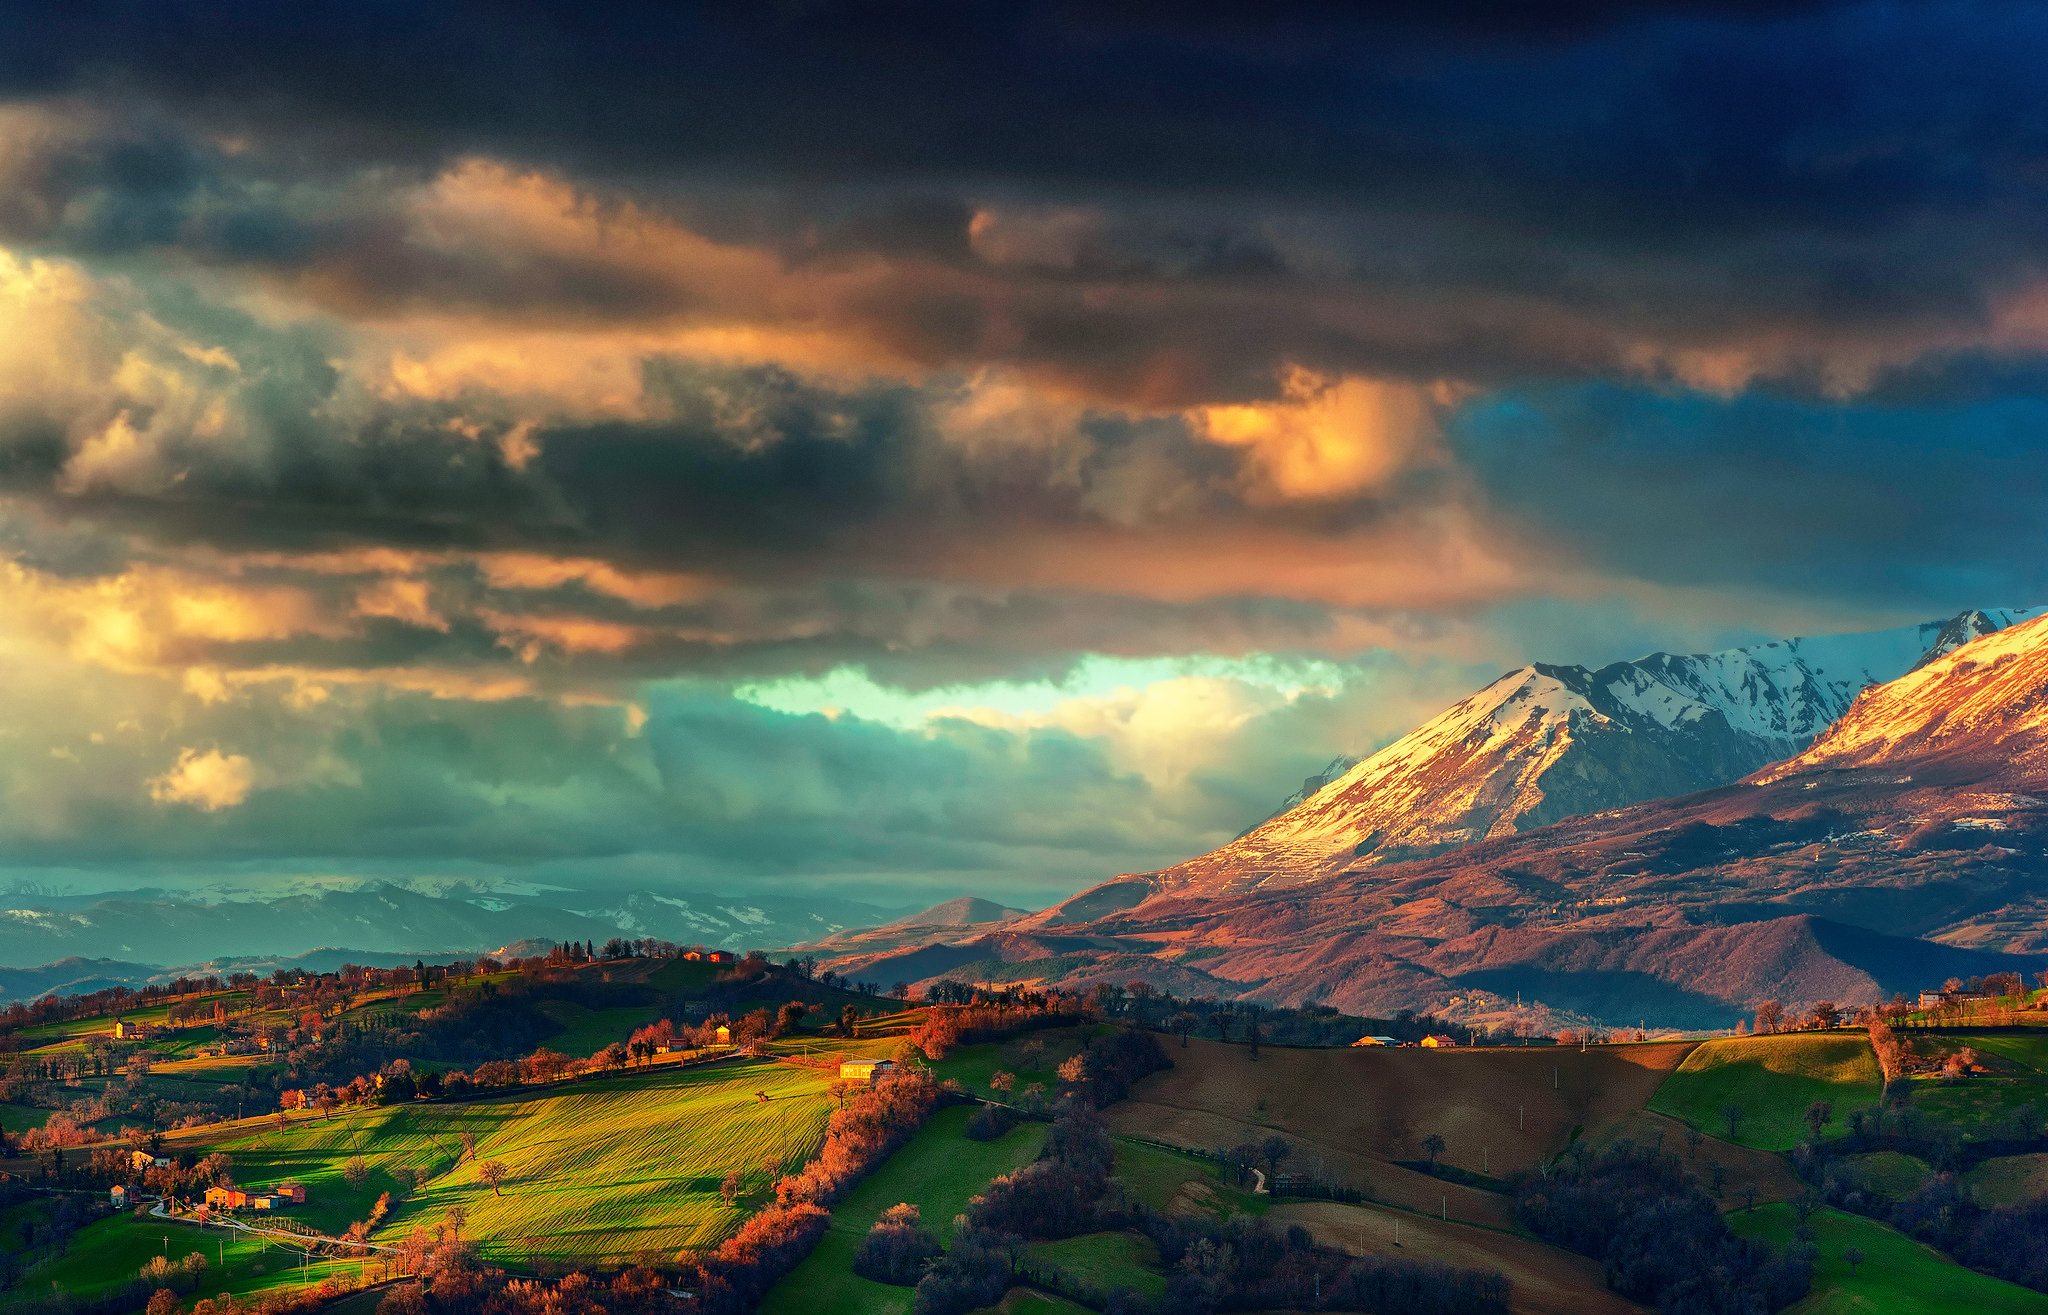 italy, The, Apennines, The, Mountain, The, Mountain, Range, Monti, Sibillini, Spring, March, Storm, Clouds, The, Sky, The, Valley, Fields, Houses Wallpaper